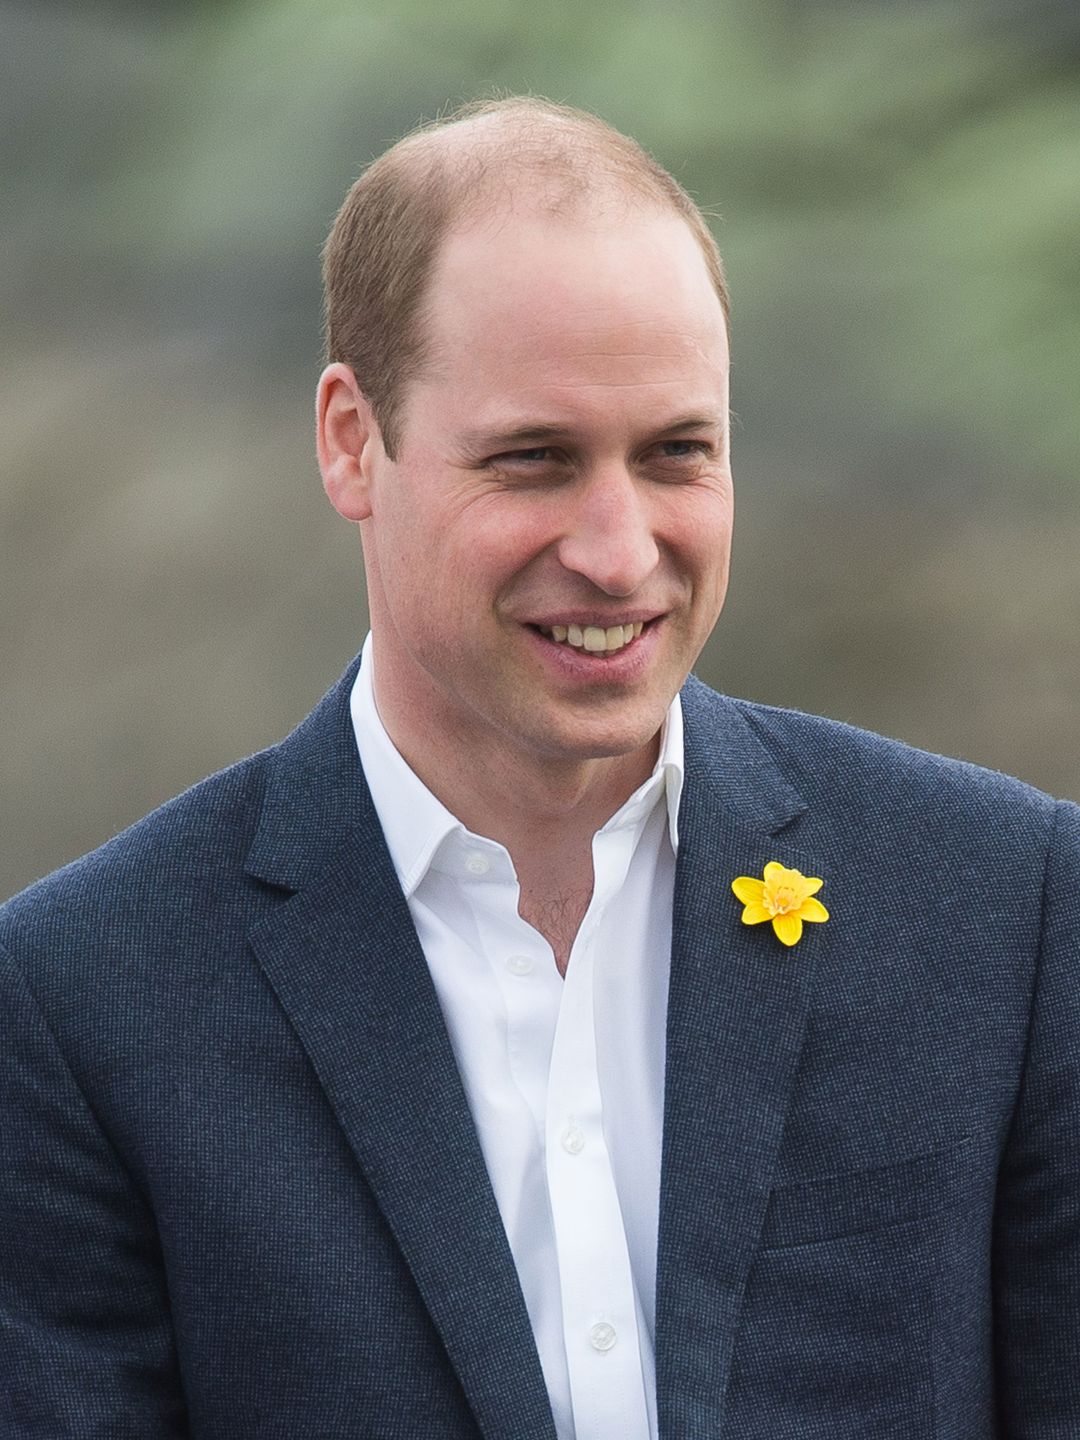 Prince William how did he became famous